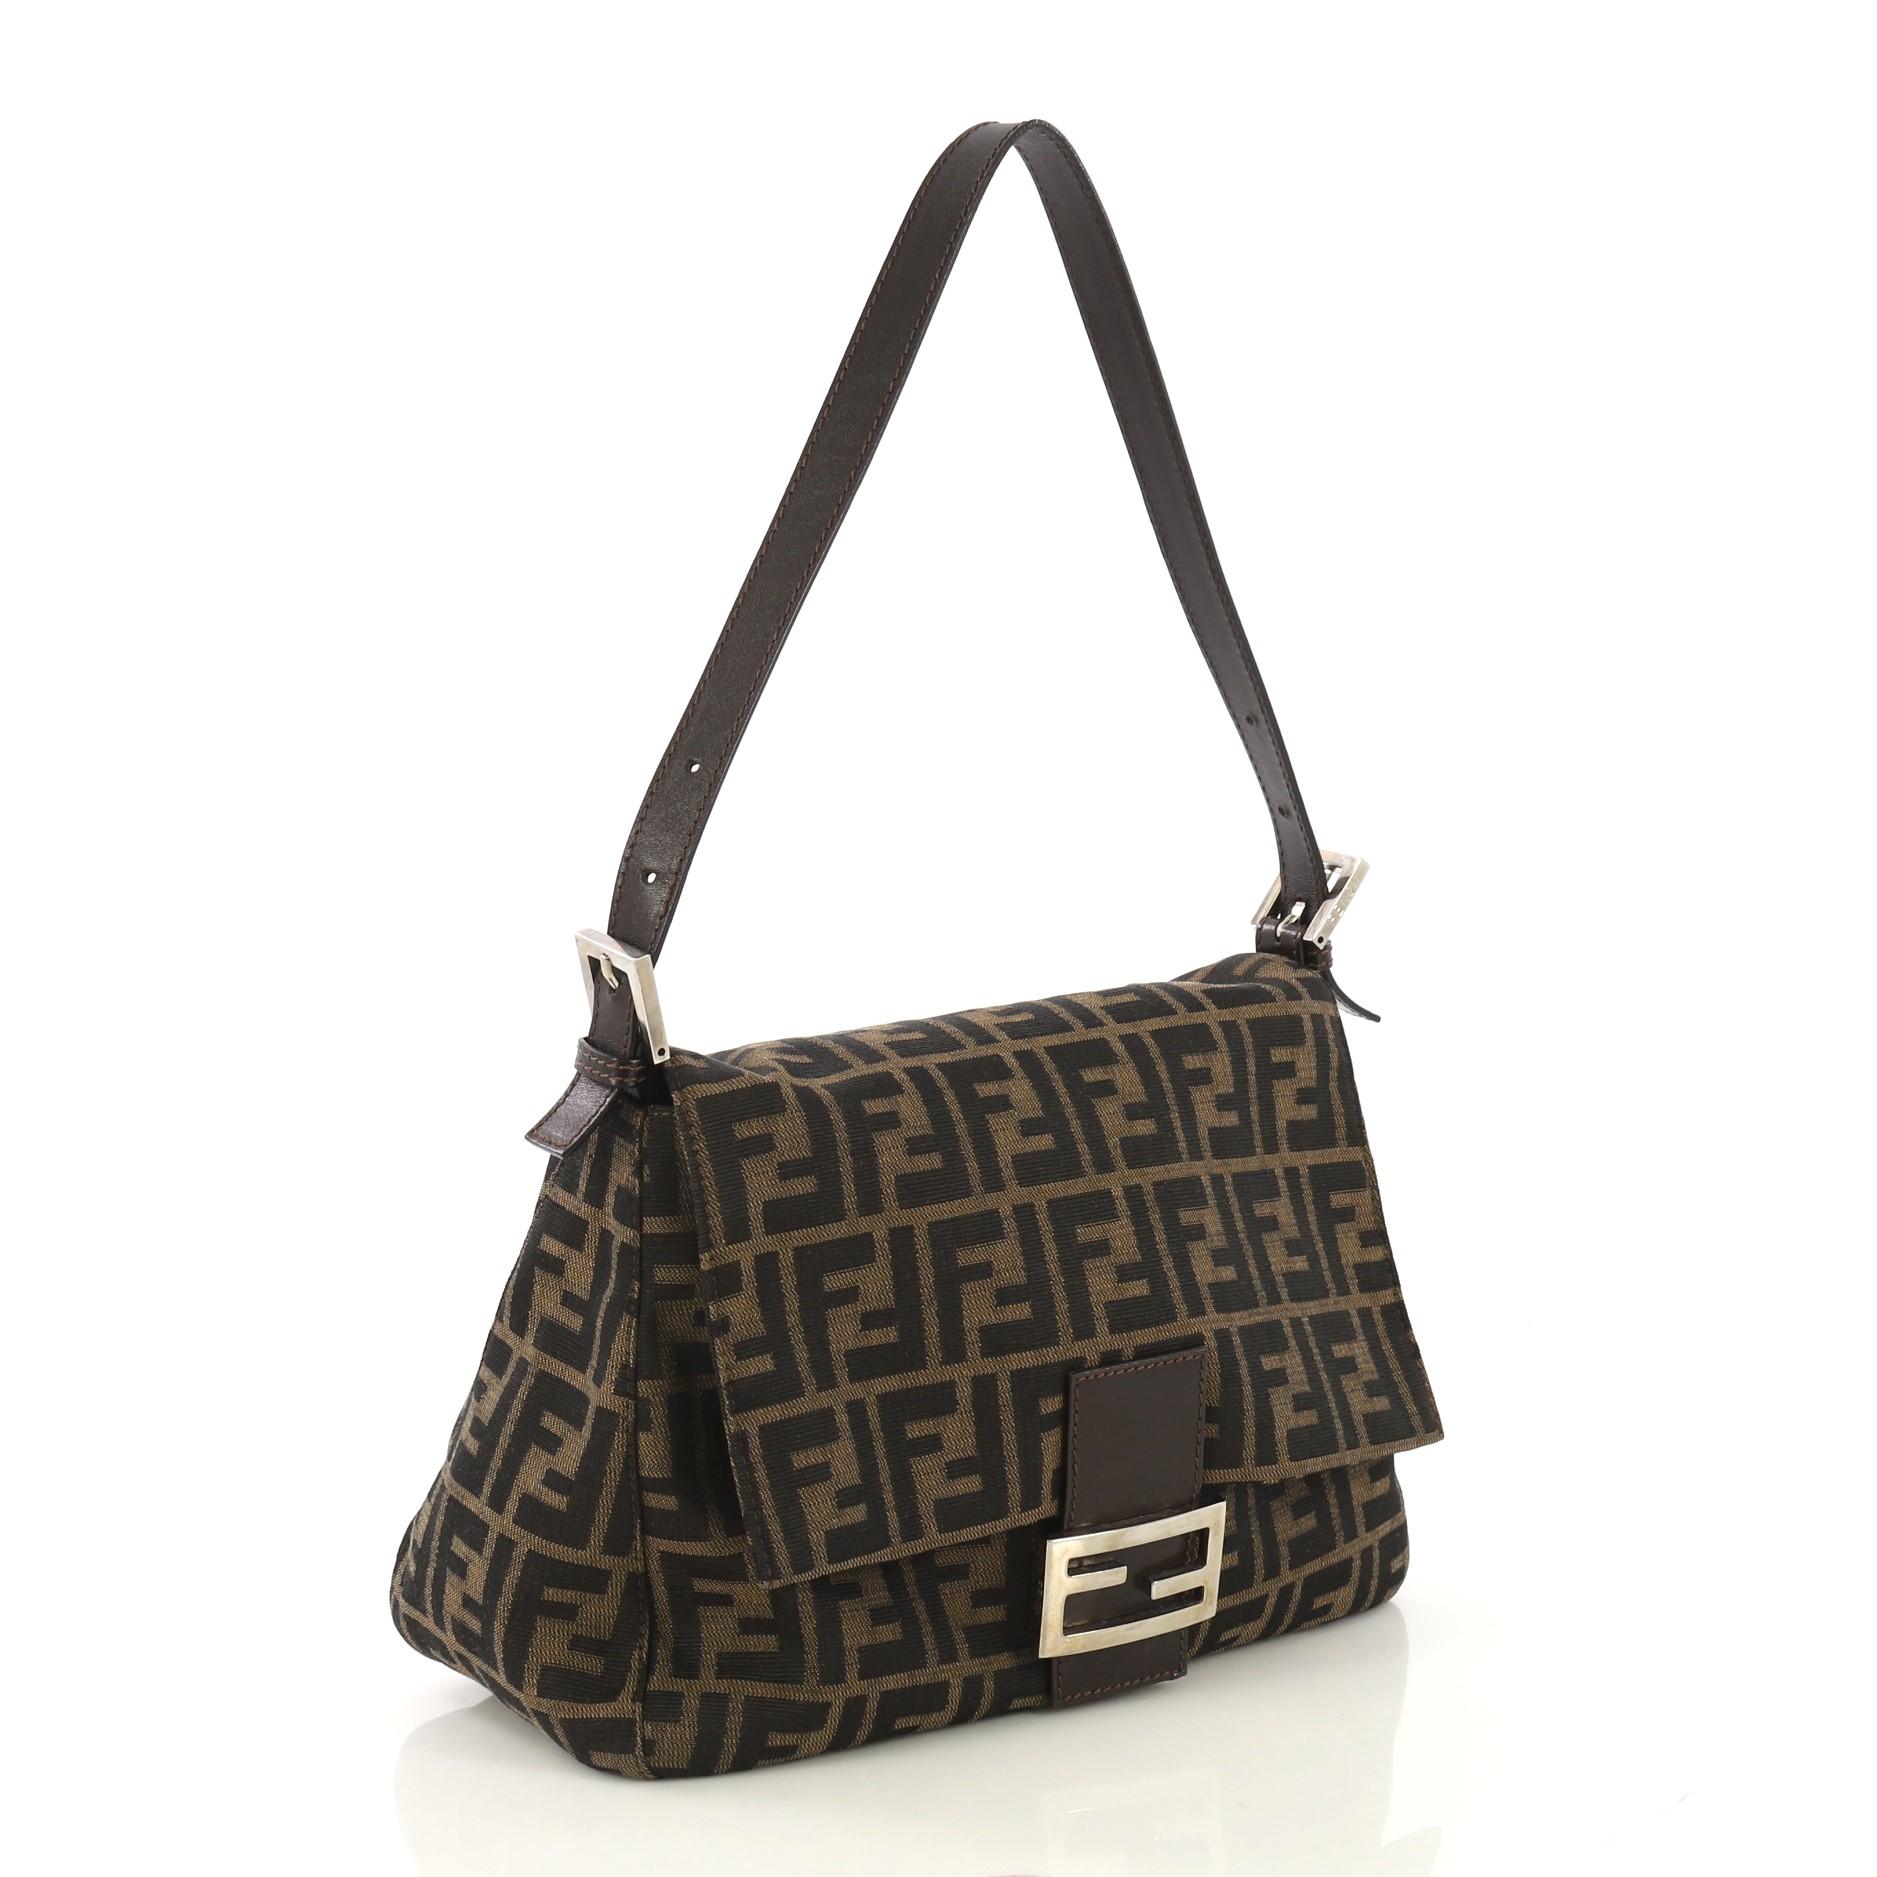 This Fendi Mama Forever Bag Zucca Canvas, crafted from brown zucca canvas, features a flat leather strap, Fendi logo detailing, and silver-tone hardware. Its hidden magnetic snap closure opens to a brown fabric interior with side zip pocket.